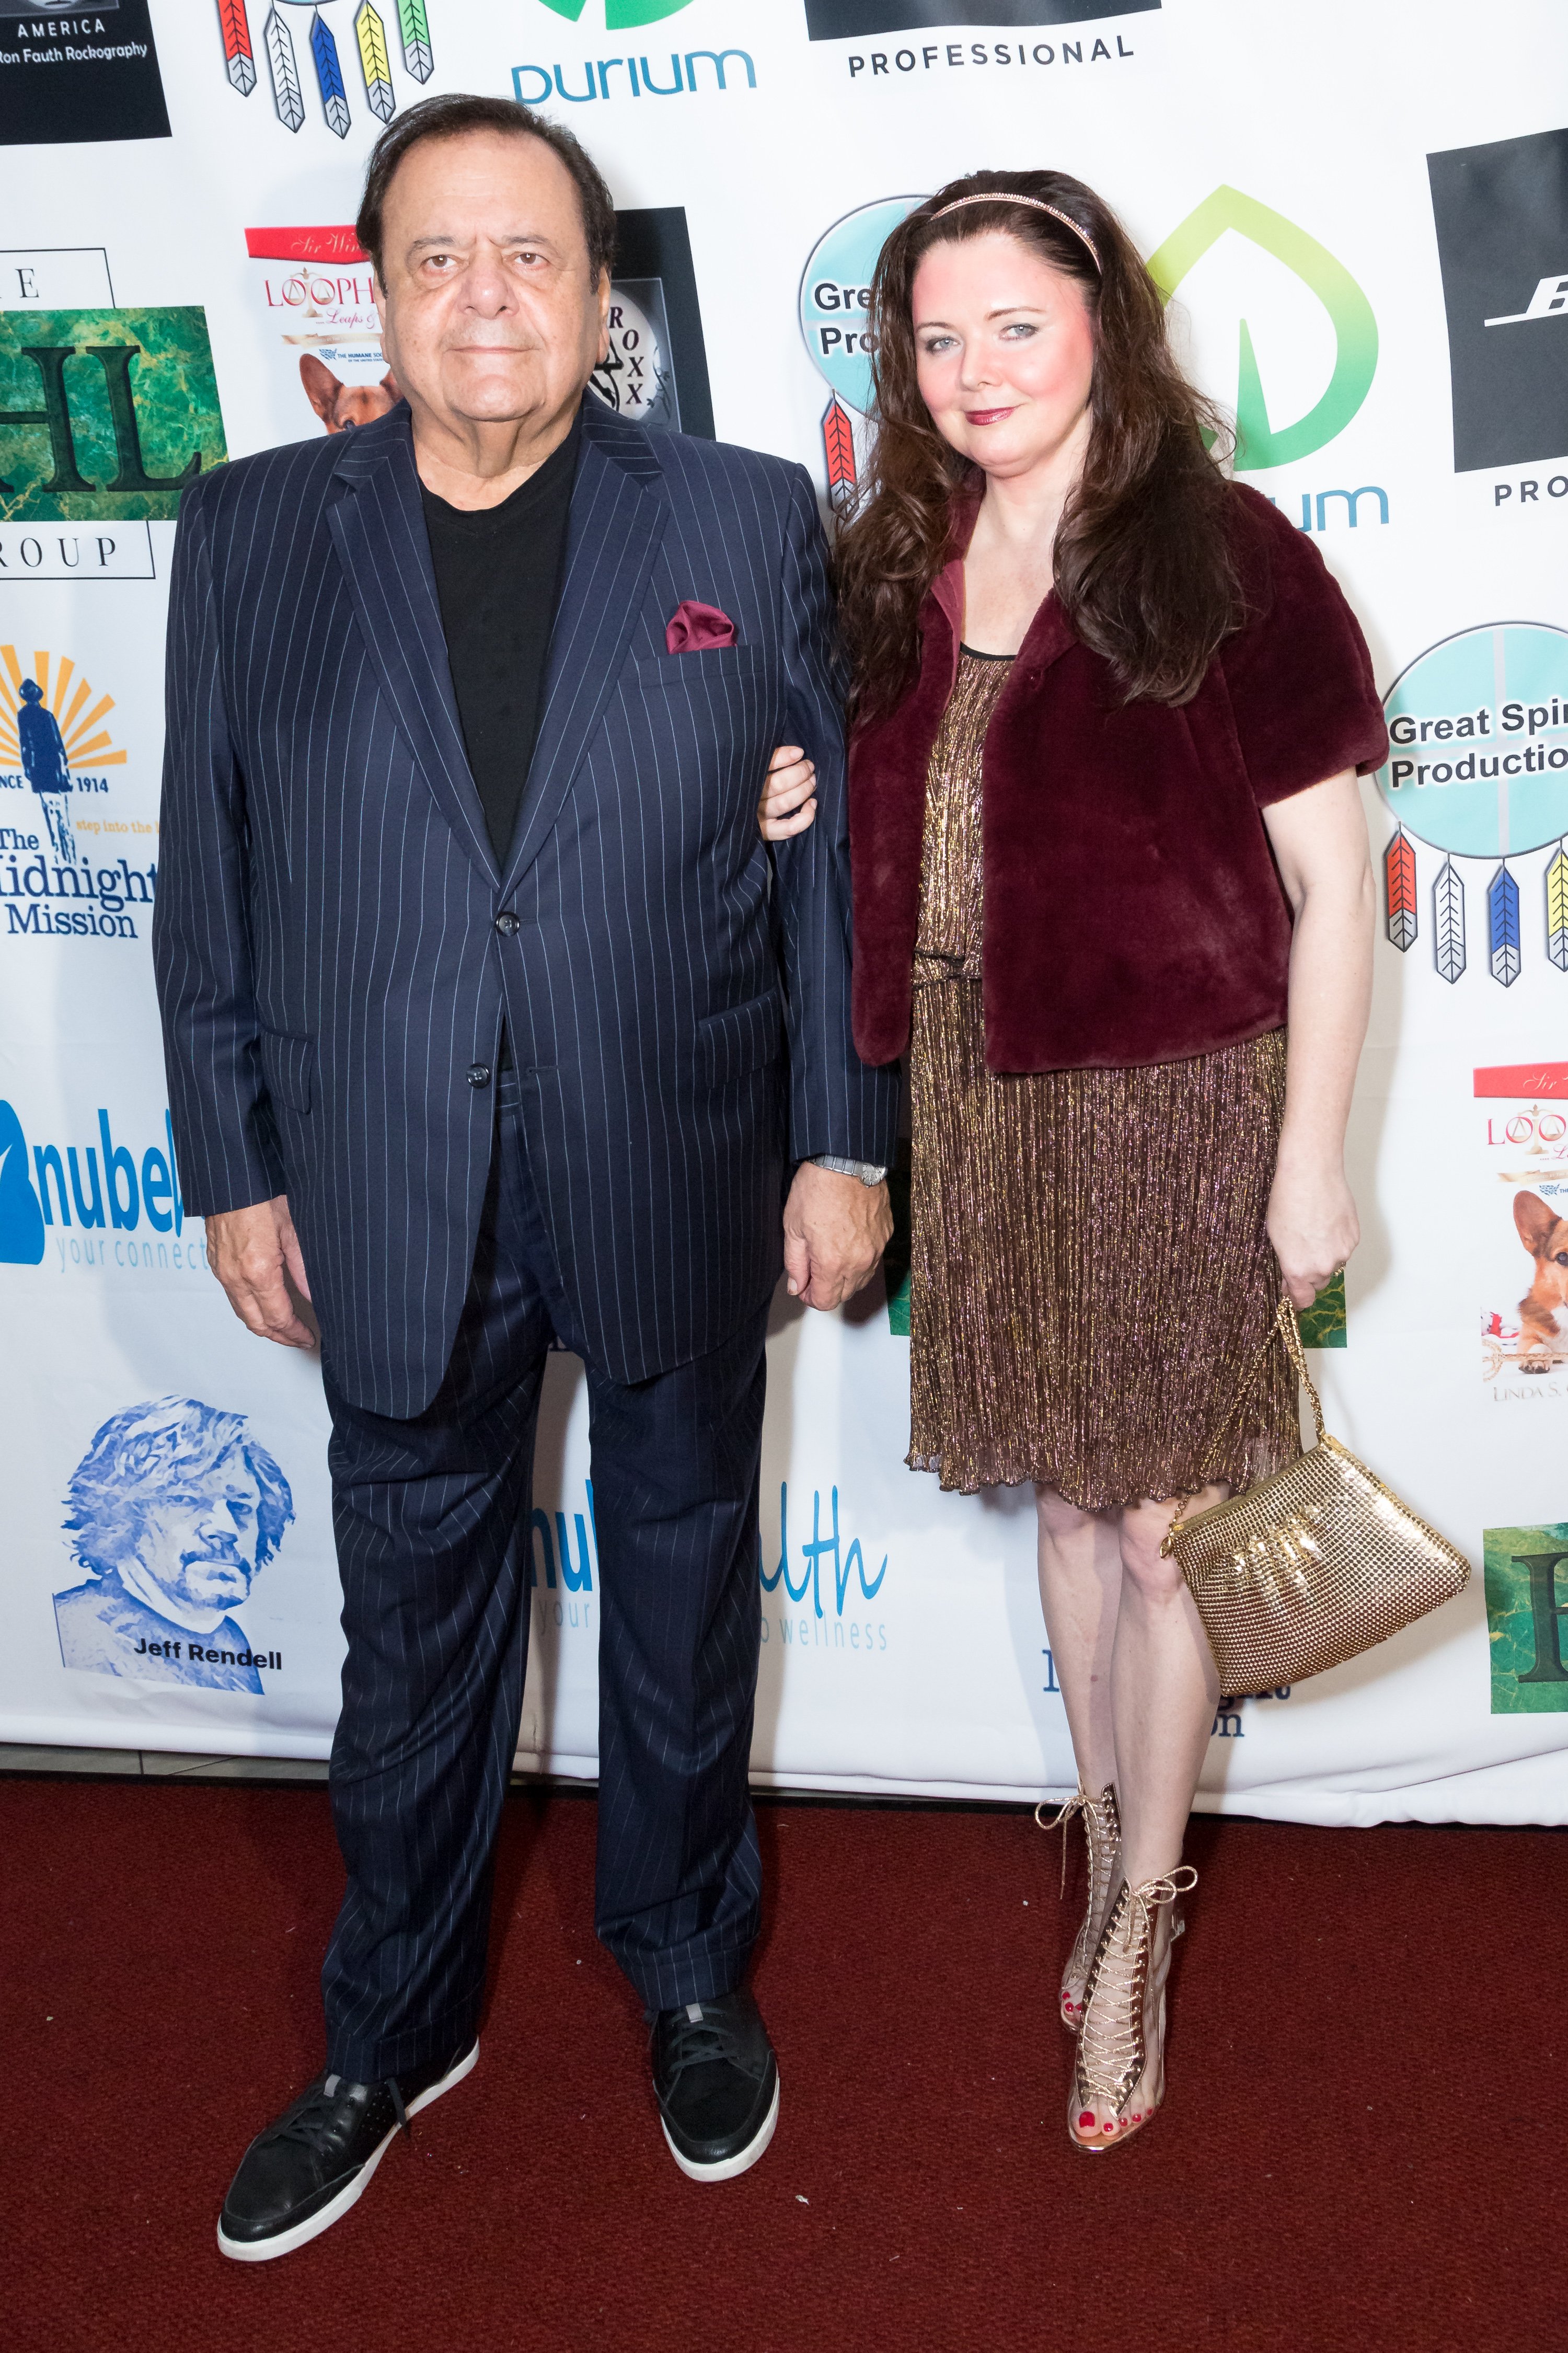 Actor Paul Sorvino and Dee Dee Sorvino attends the 11th Annual Hollywood F.A.M.E. Awards at Hard Rock Cafe, Hollywood, CA on November 8, 2017 in Hollywood, California. | Source: Getty Images